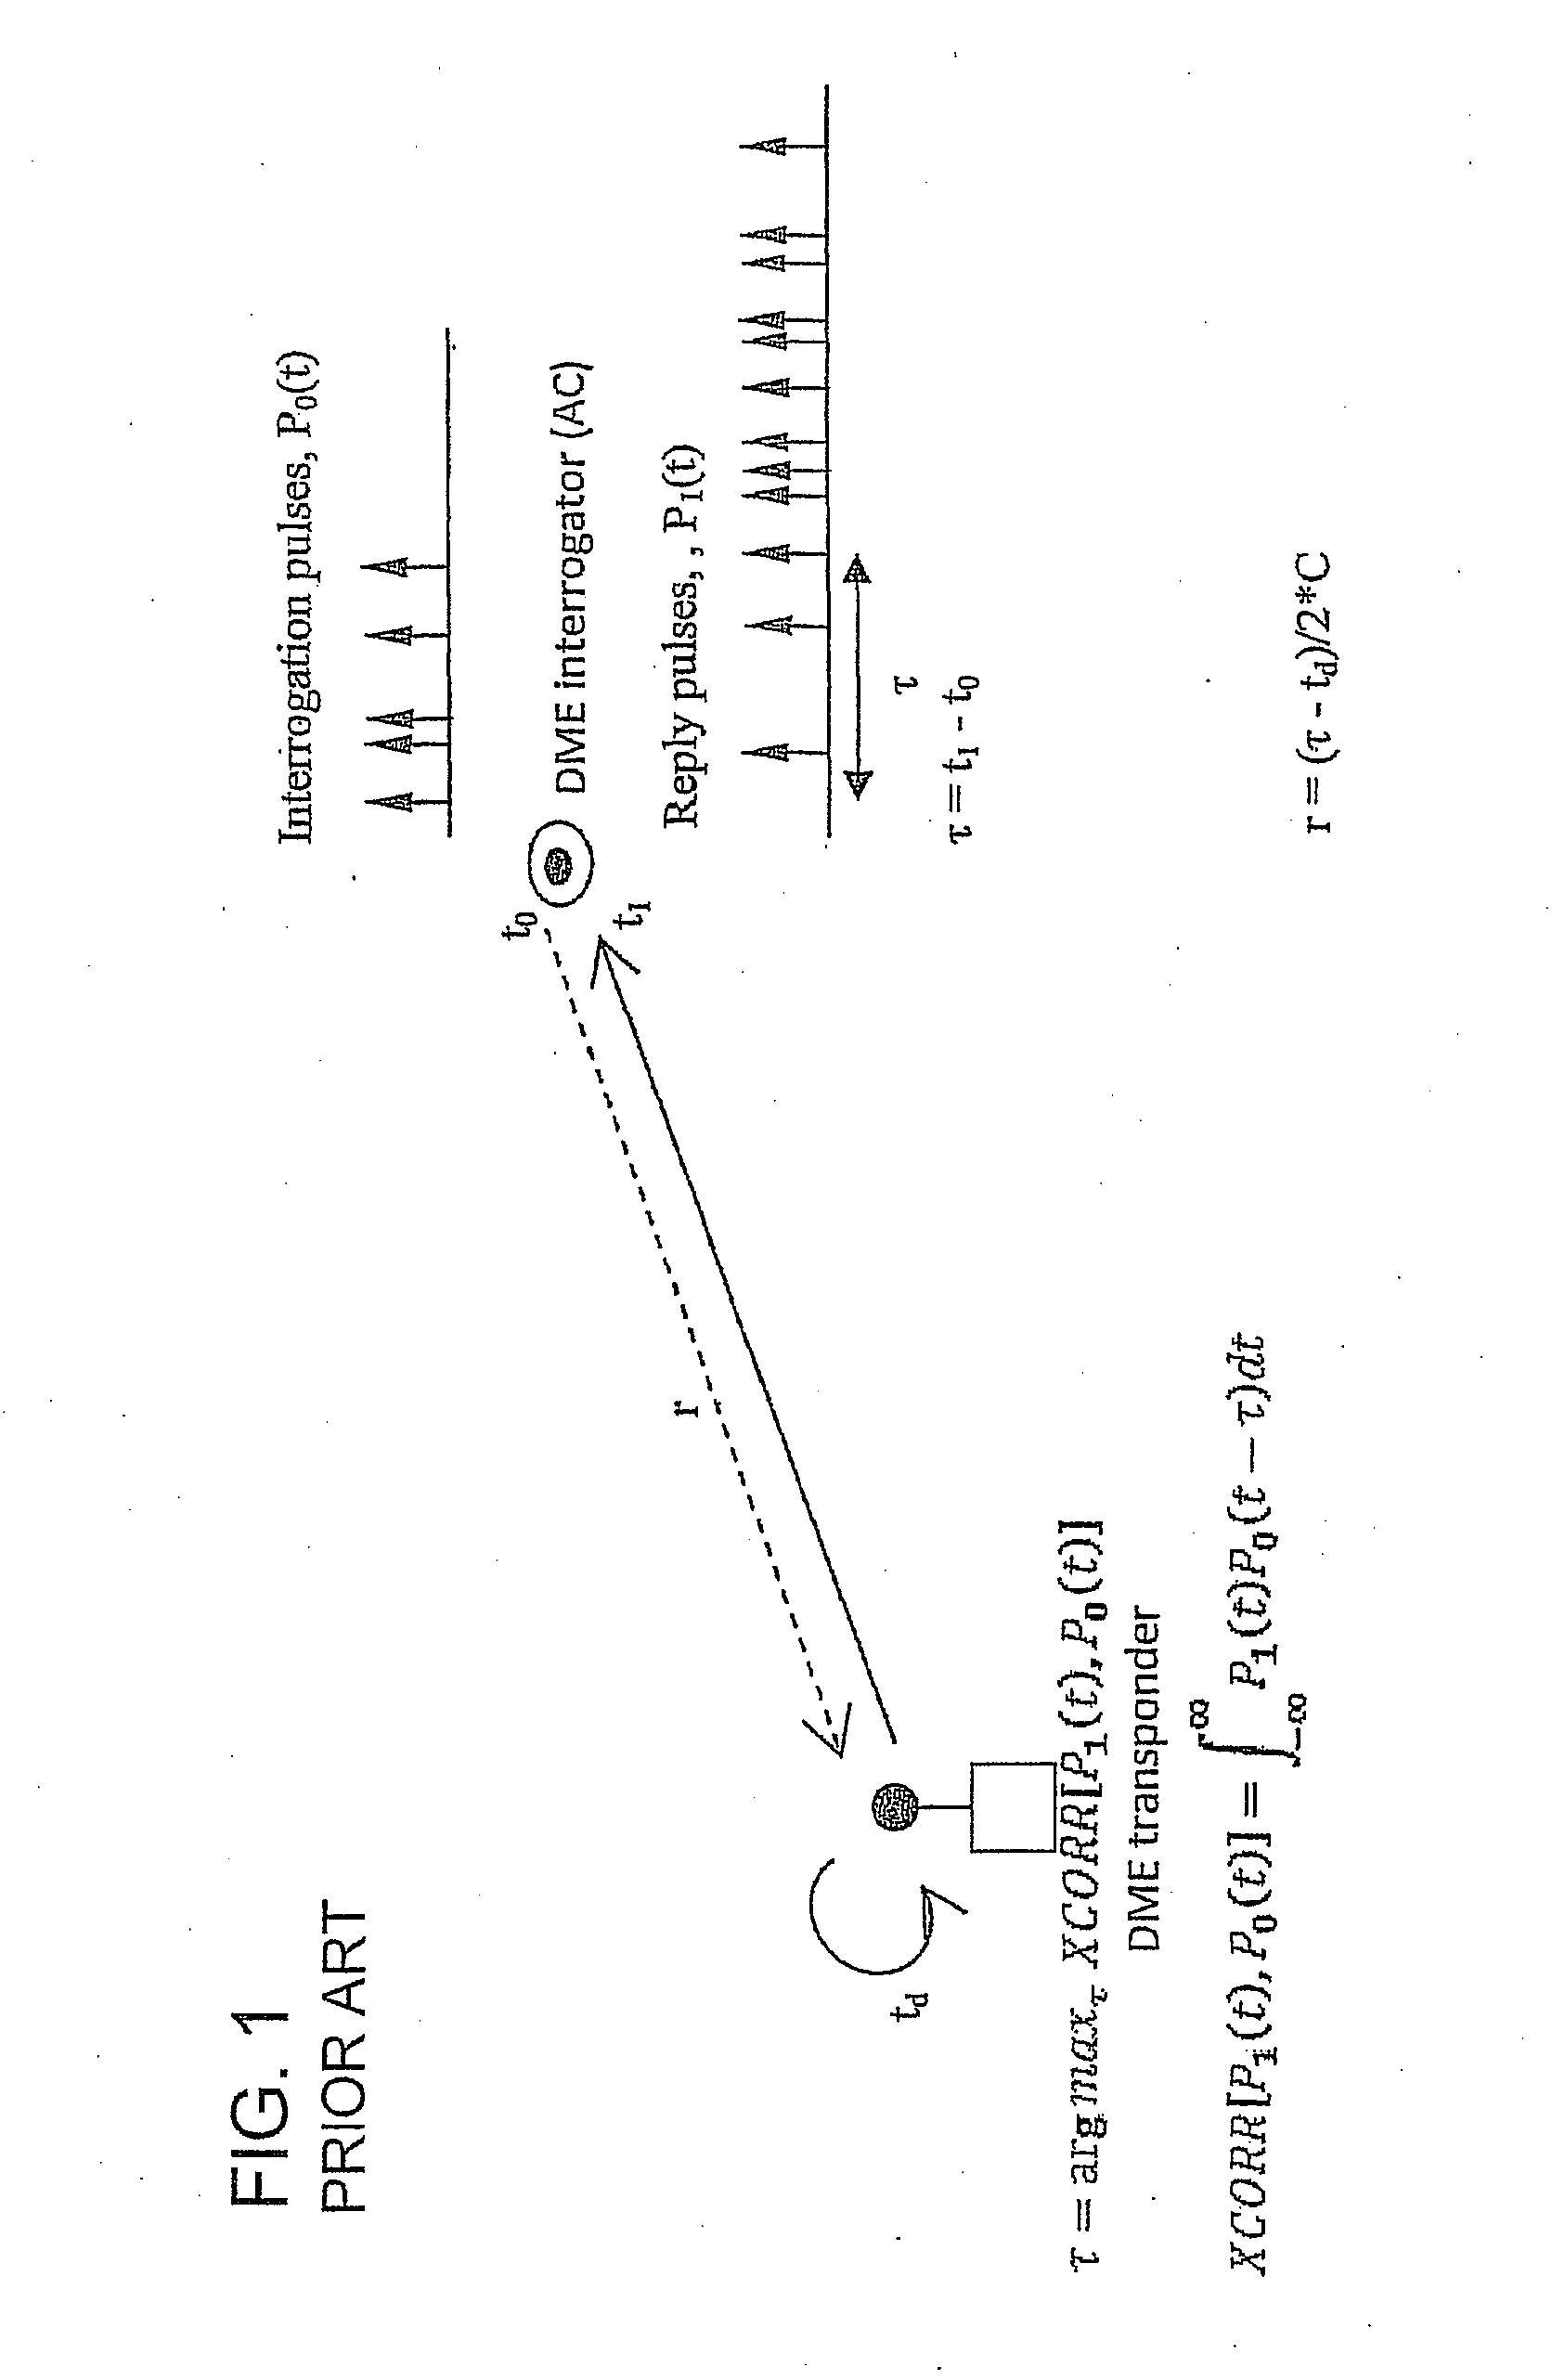 System and method for aircraft navigation using signals transmitted in the dme transponder frequency range